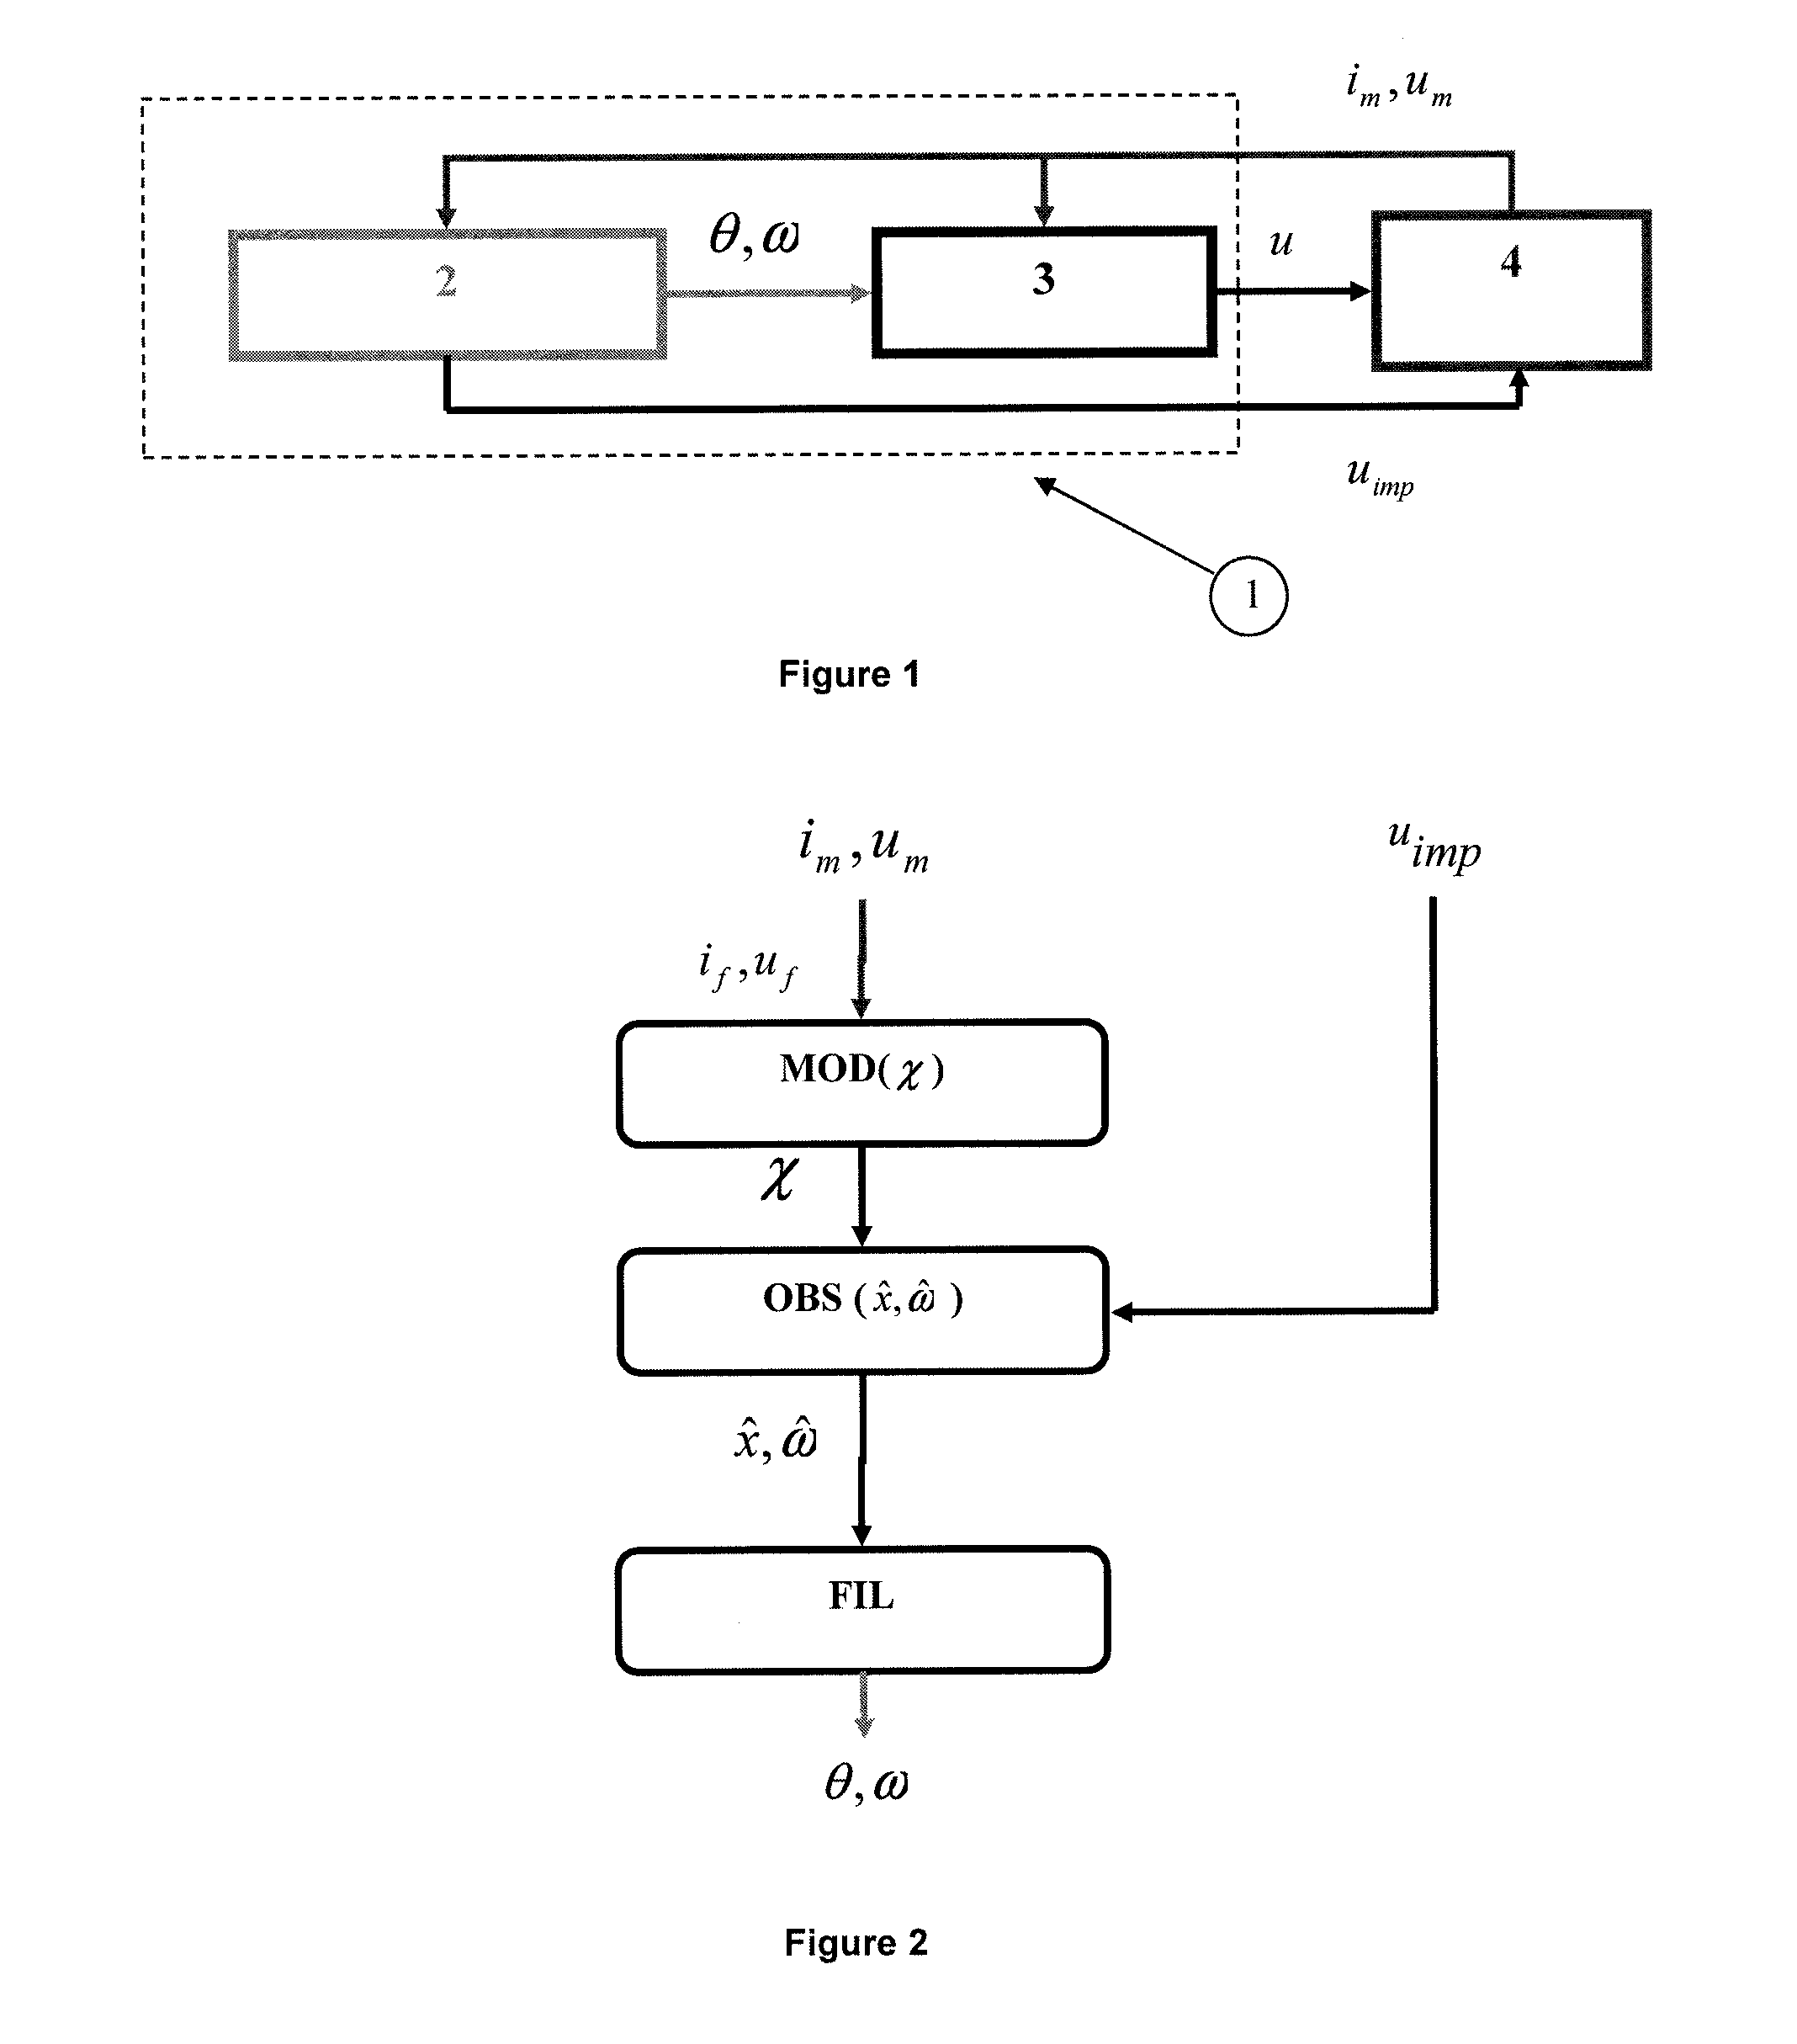 Method of determining the position and the speed of a rotor in a synchronous electric machine using state observers